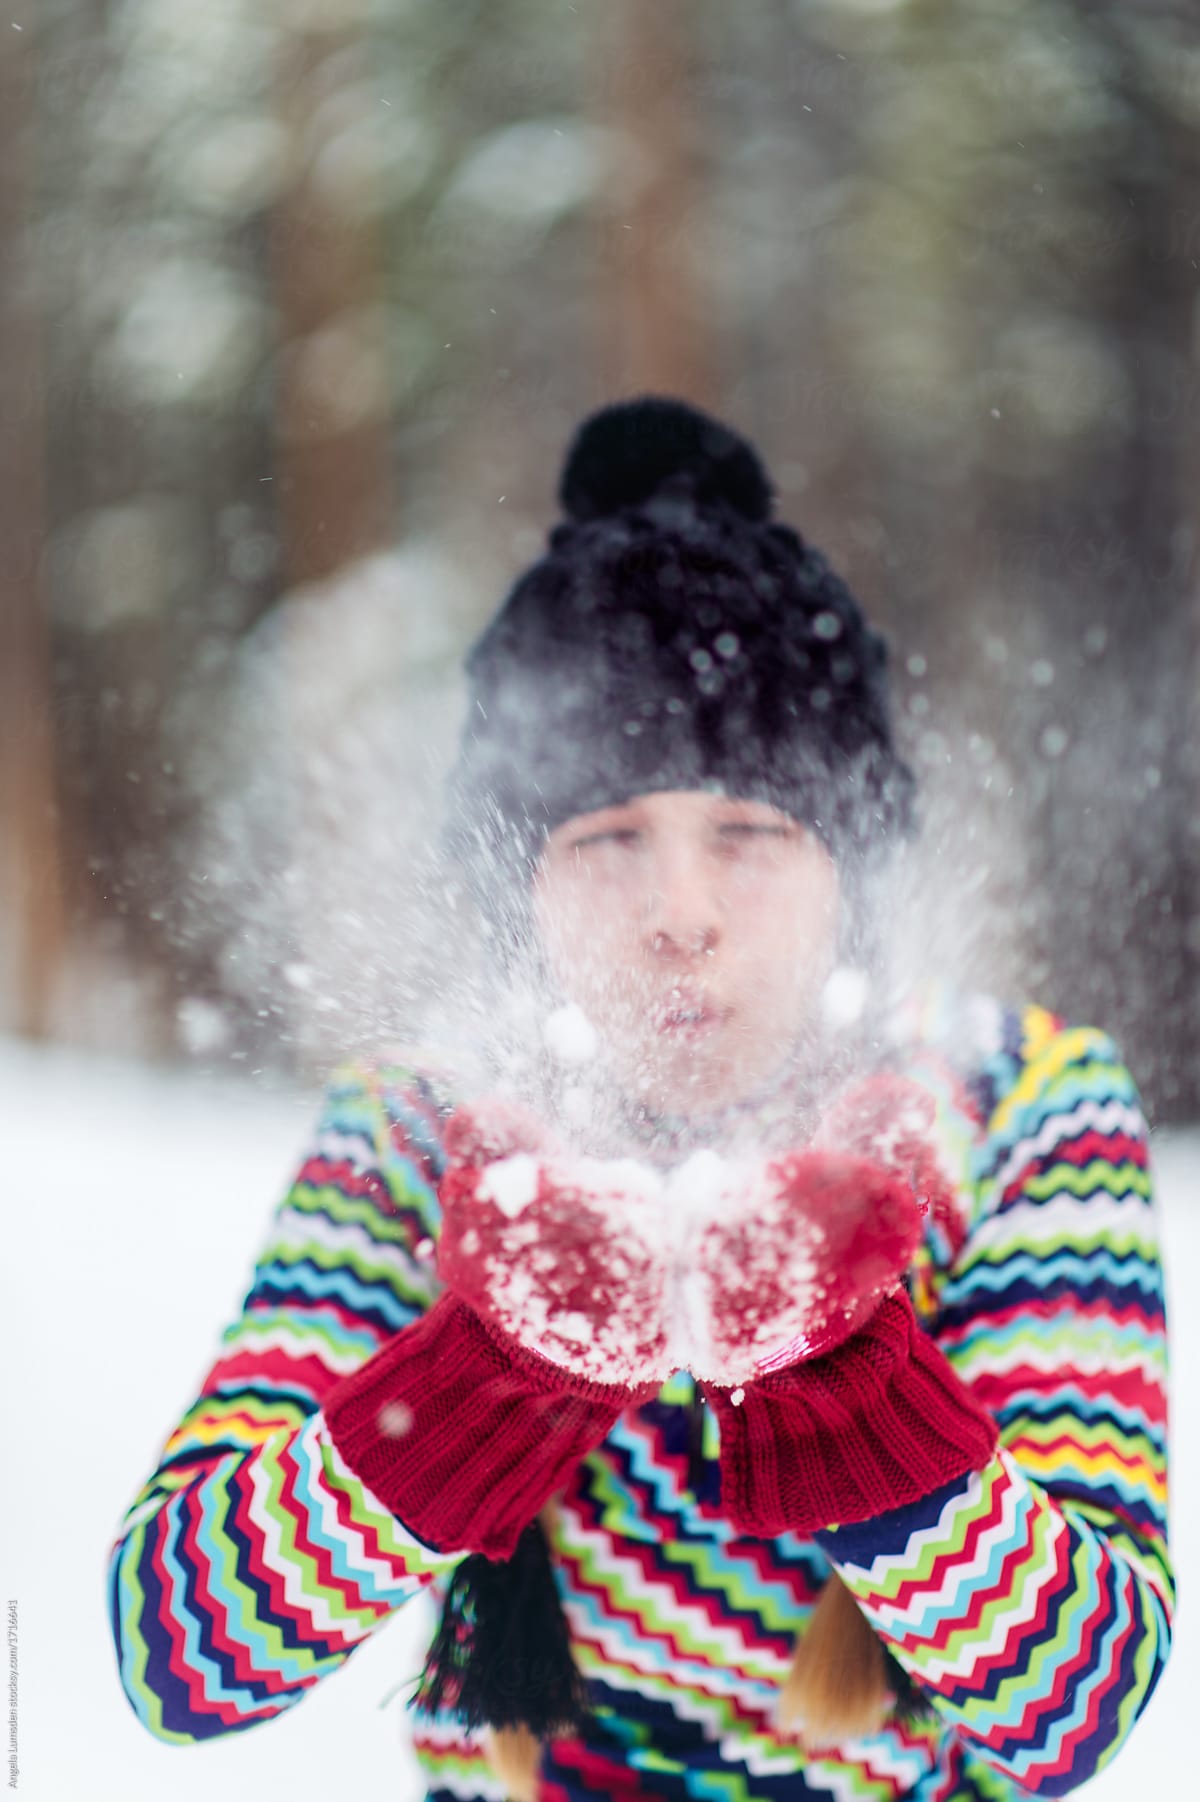 Teenage girl blowing snow out of red mittens in winter